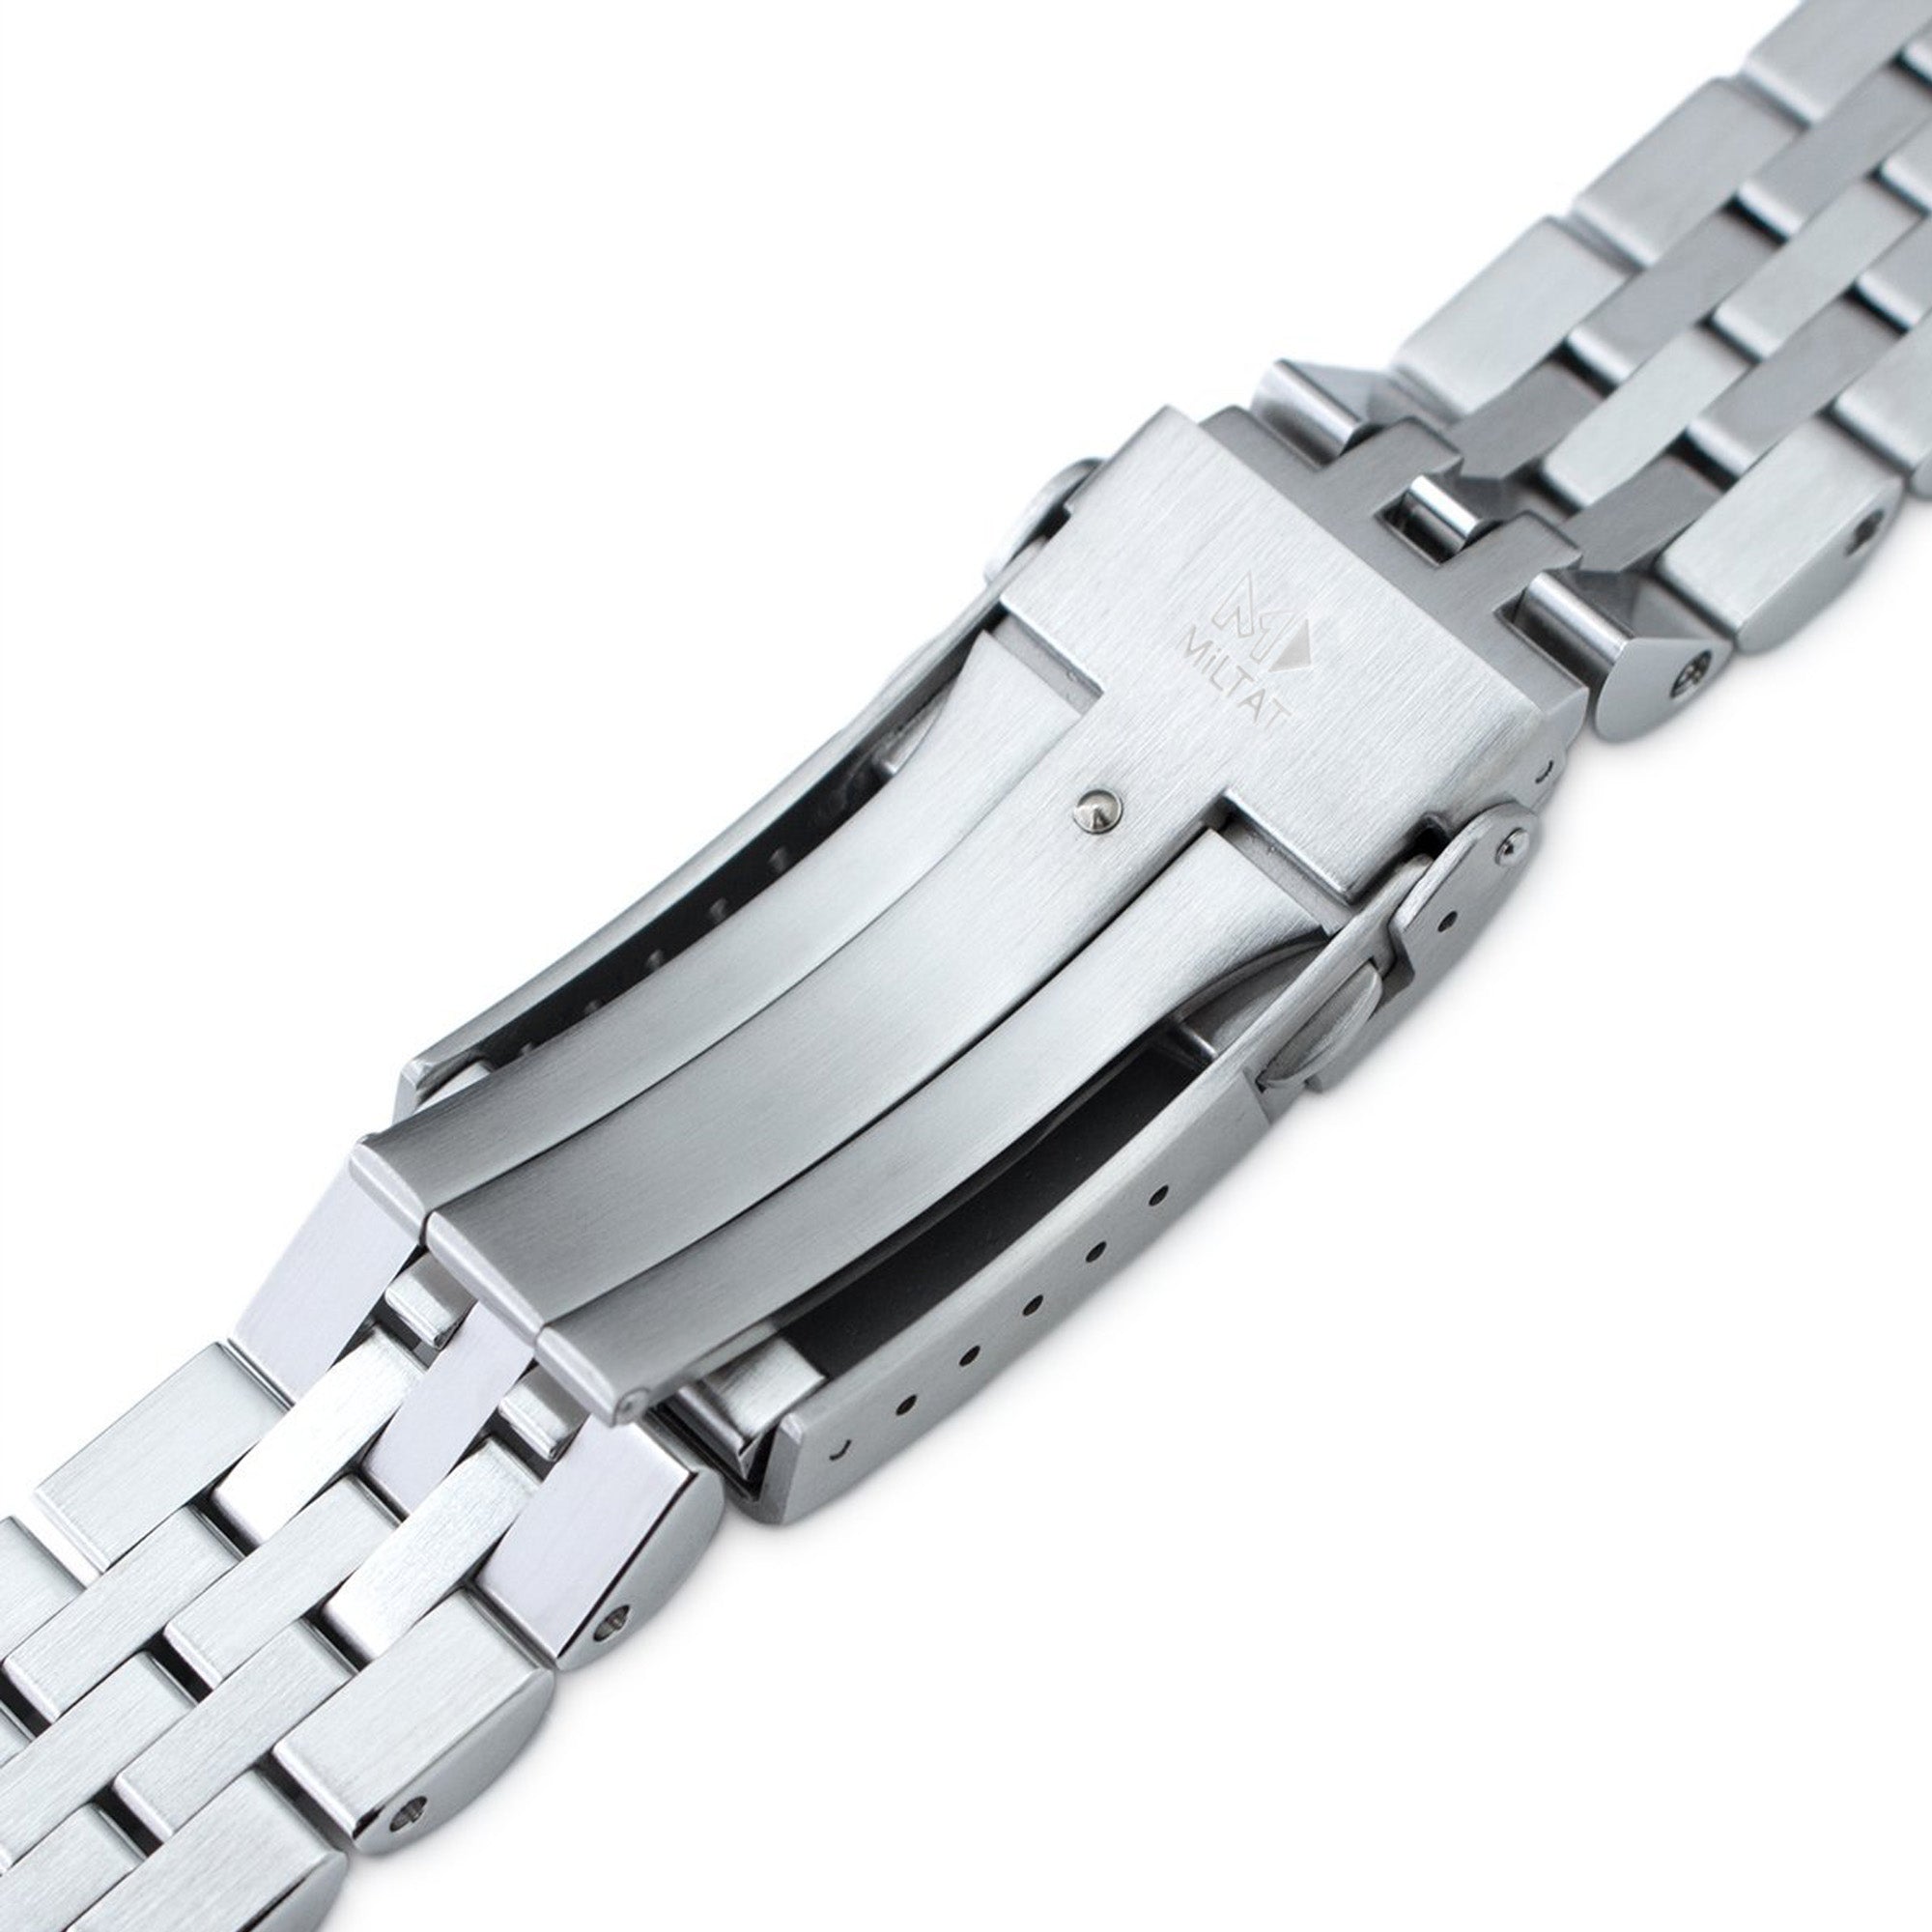 20mm Angus-J Louis JUB Watch Band Straight End, 316L Stainless Steel Brushed/Polished V-Clasp